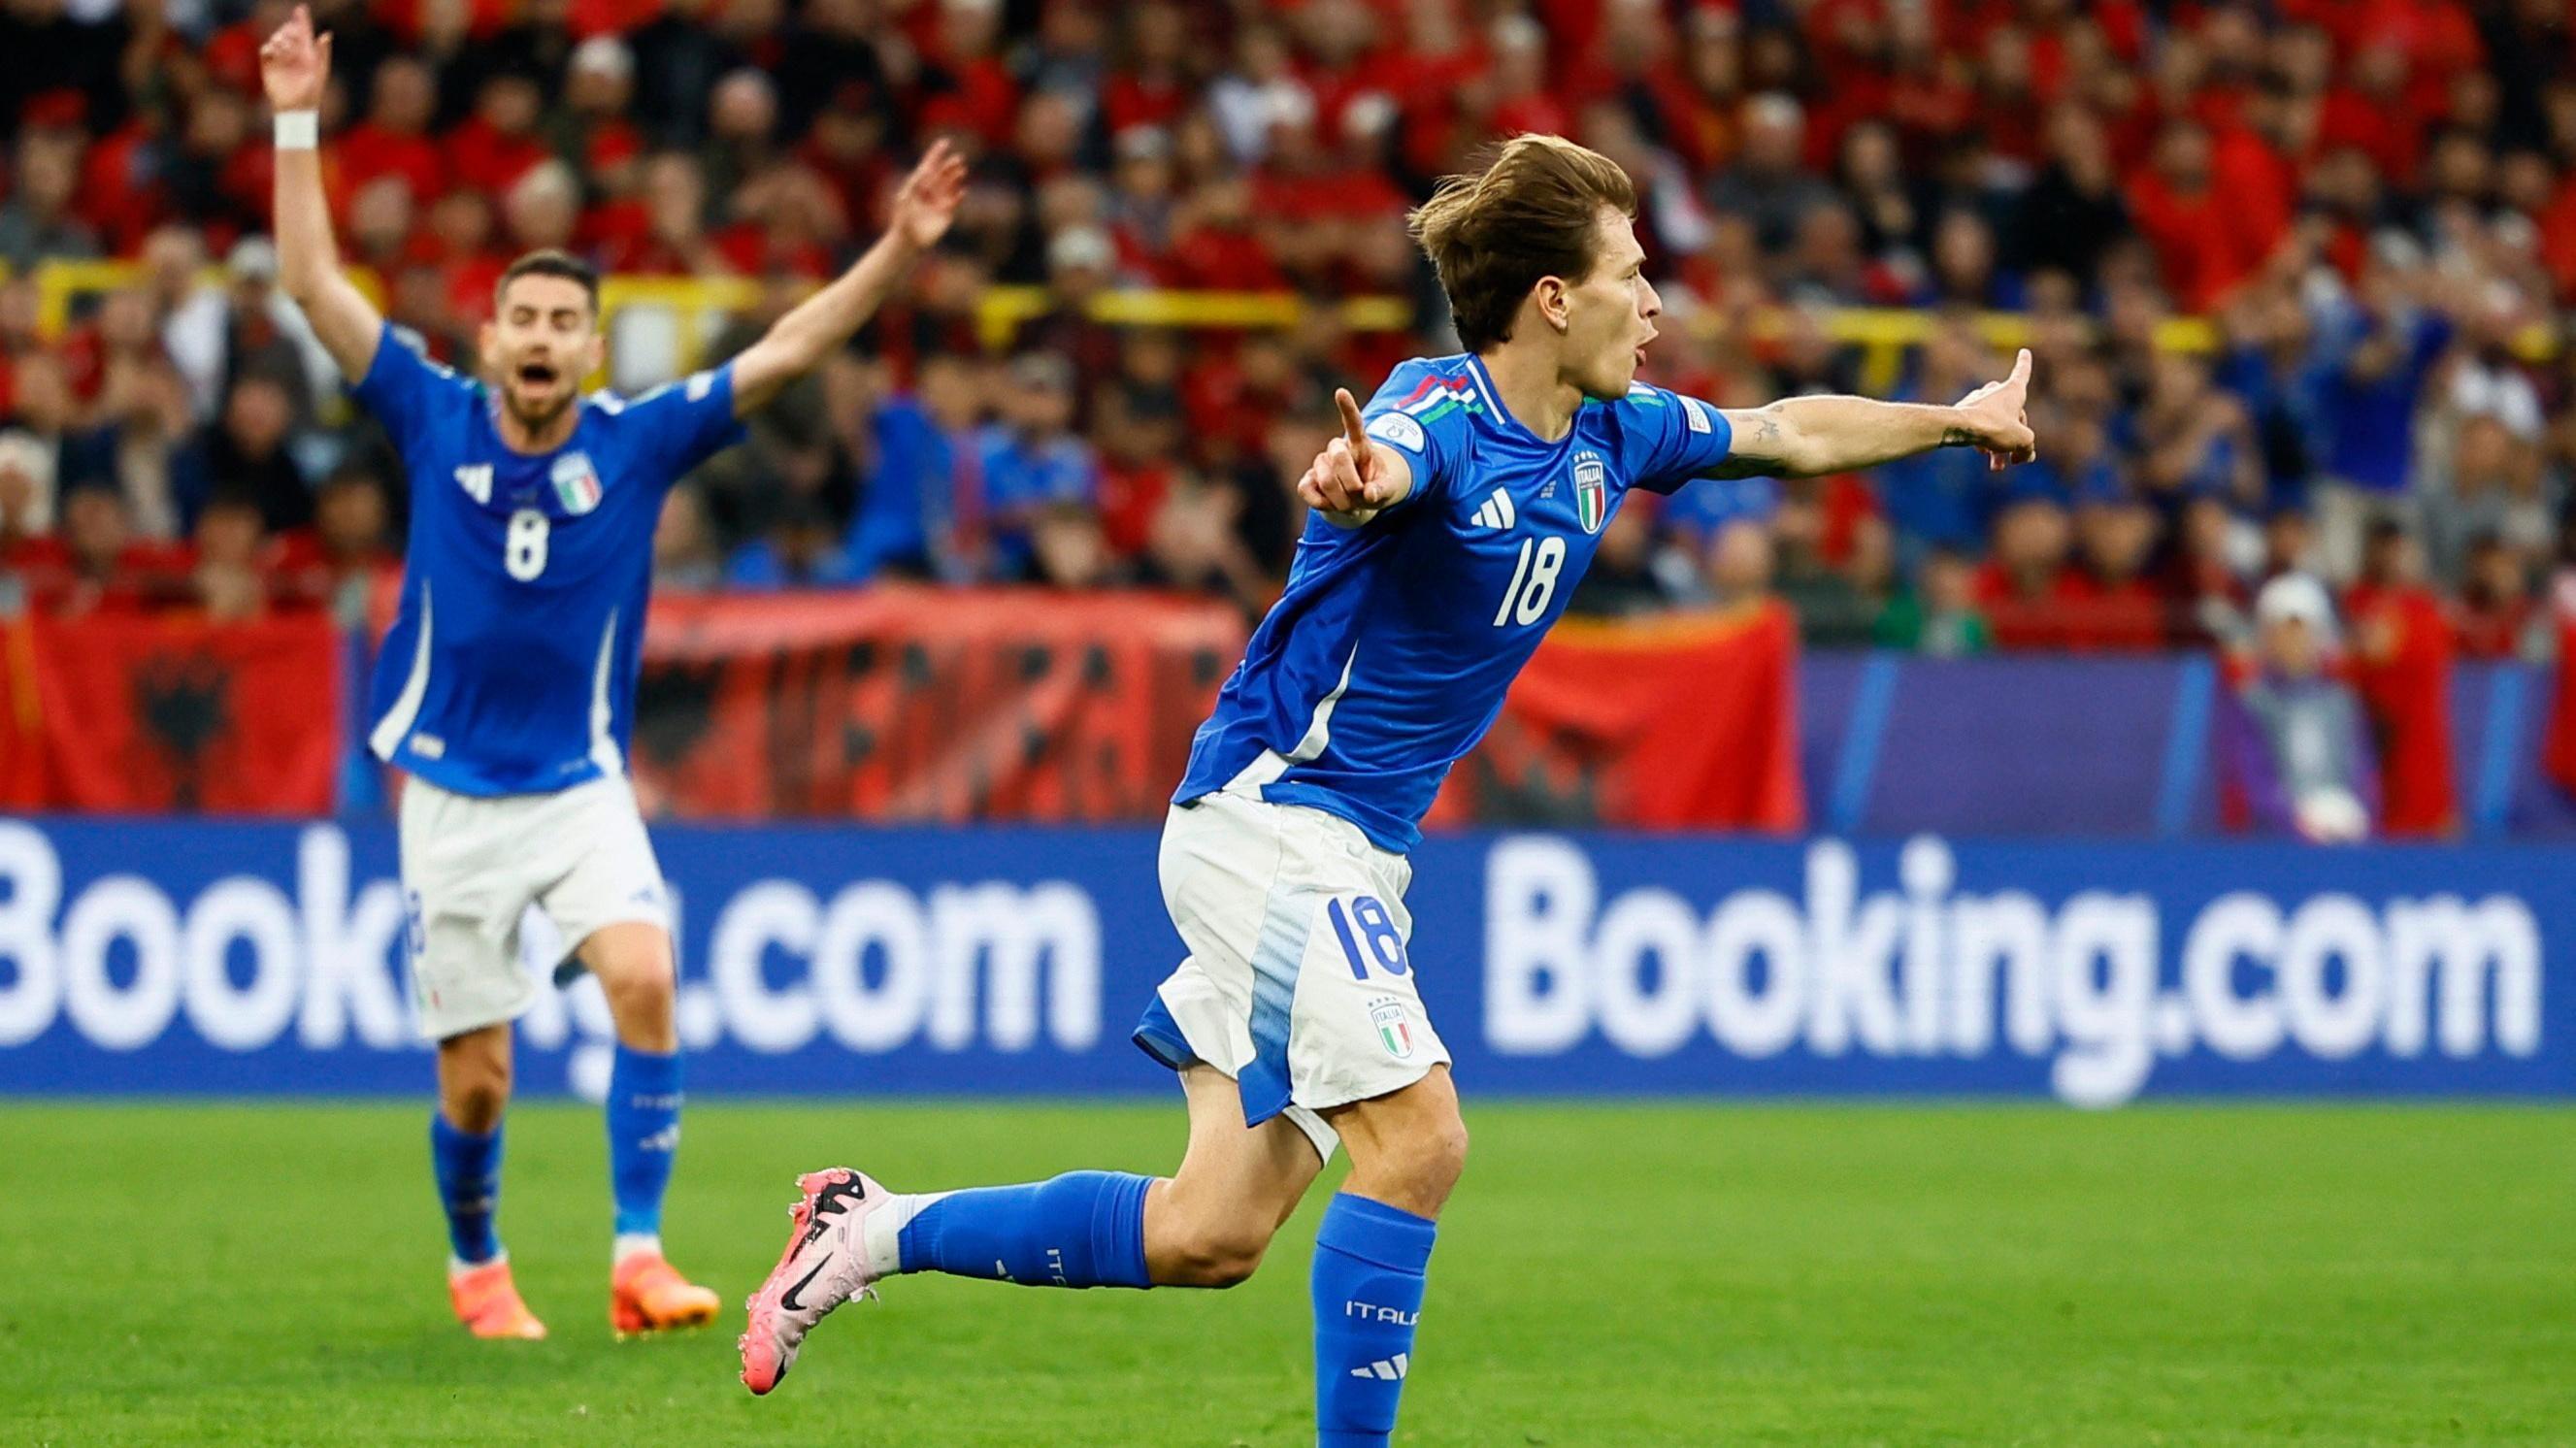 Holders Italy begin title defence with win over Albania